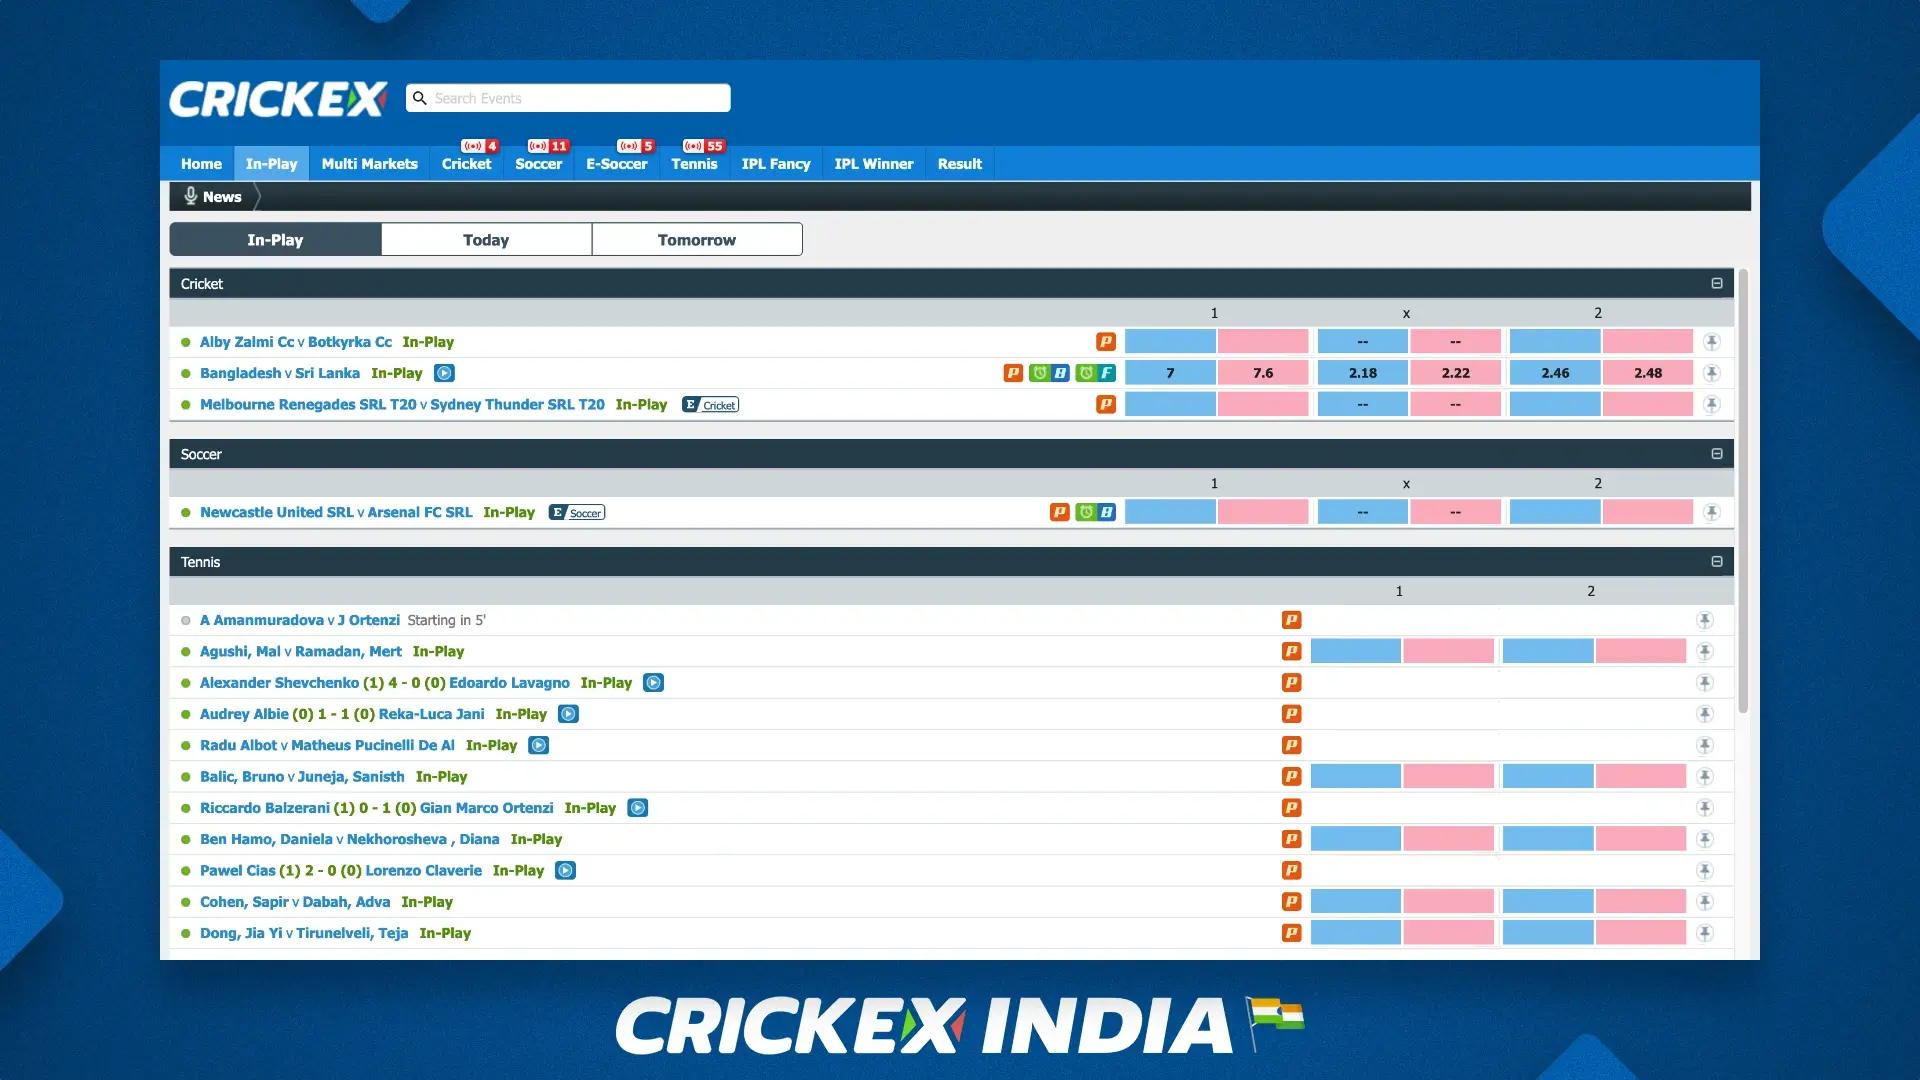 Live betting section with real time statistics at Crickex website